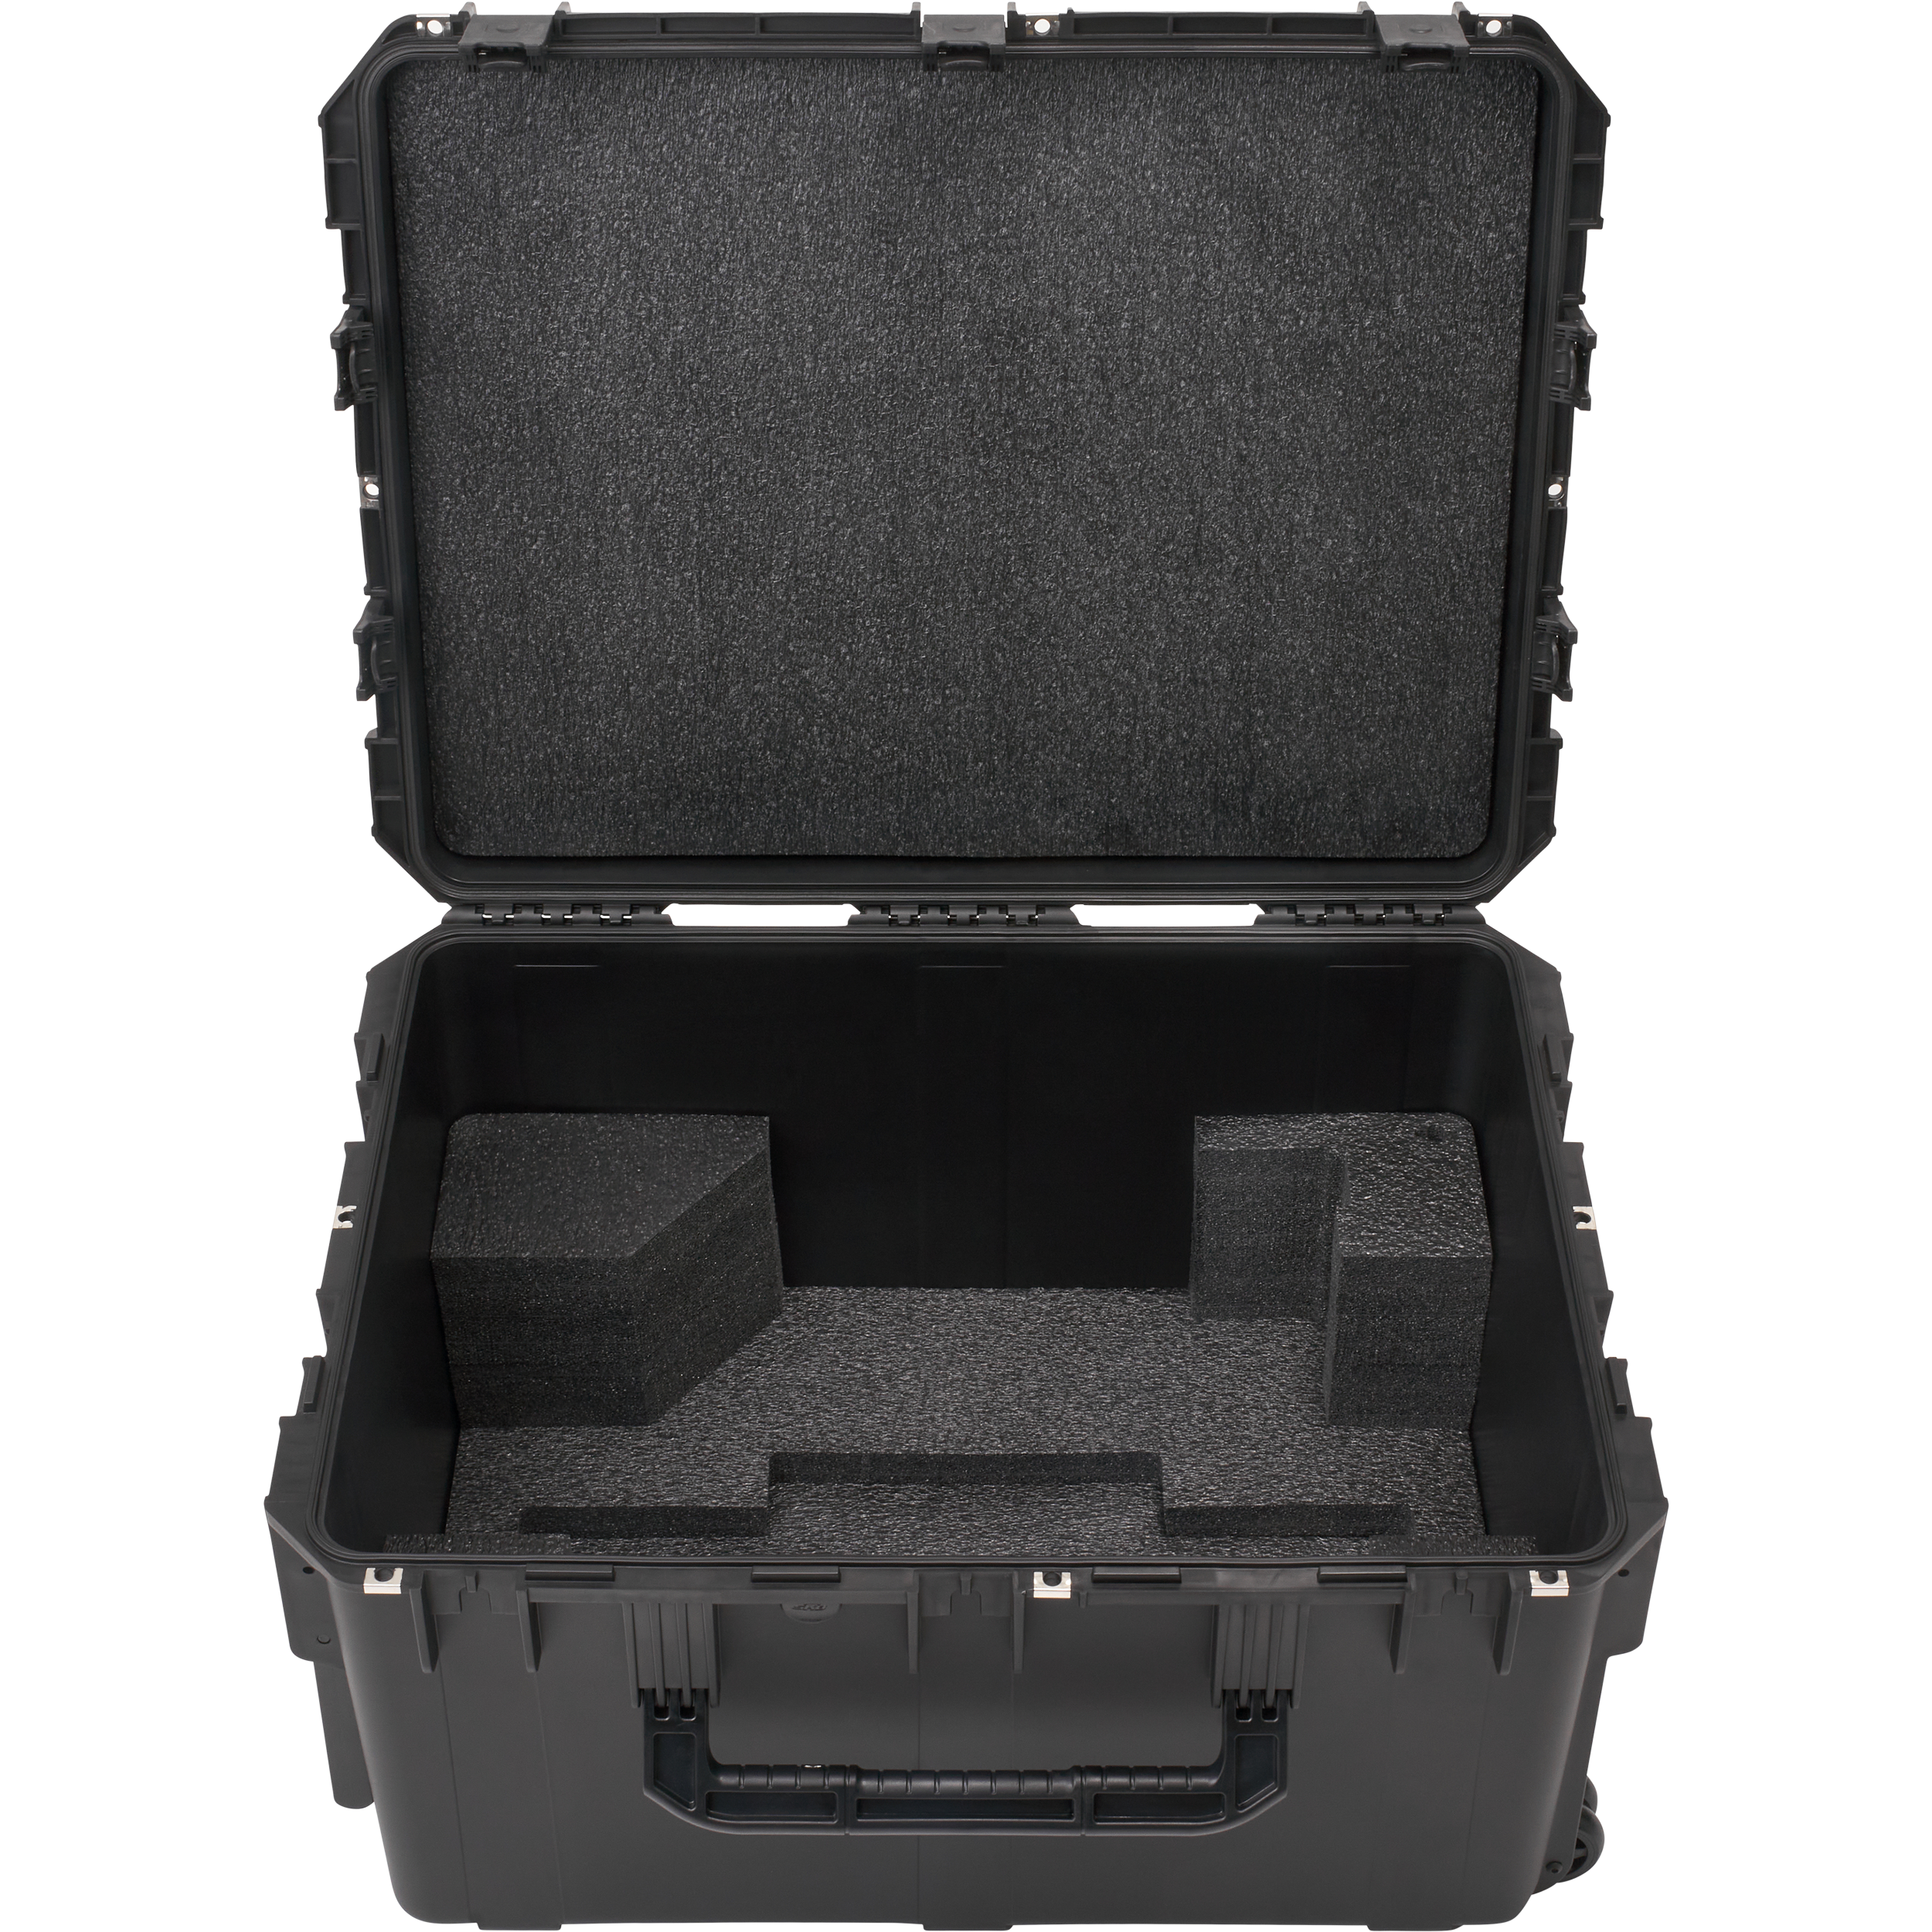 BYFP ipCase for Electro-Voice Evolve 50 Subwoofer